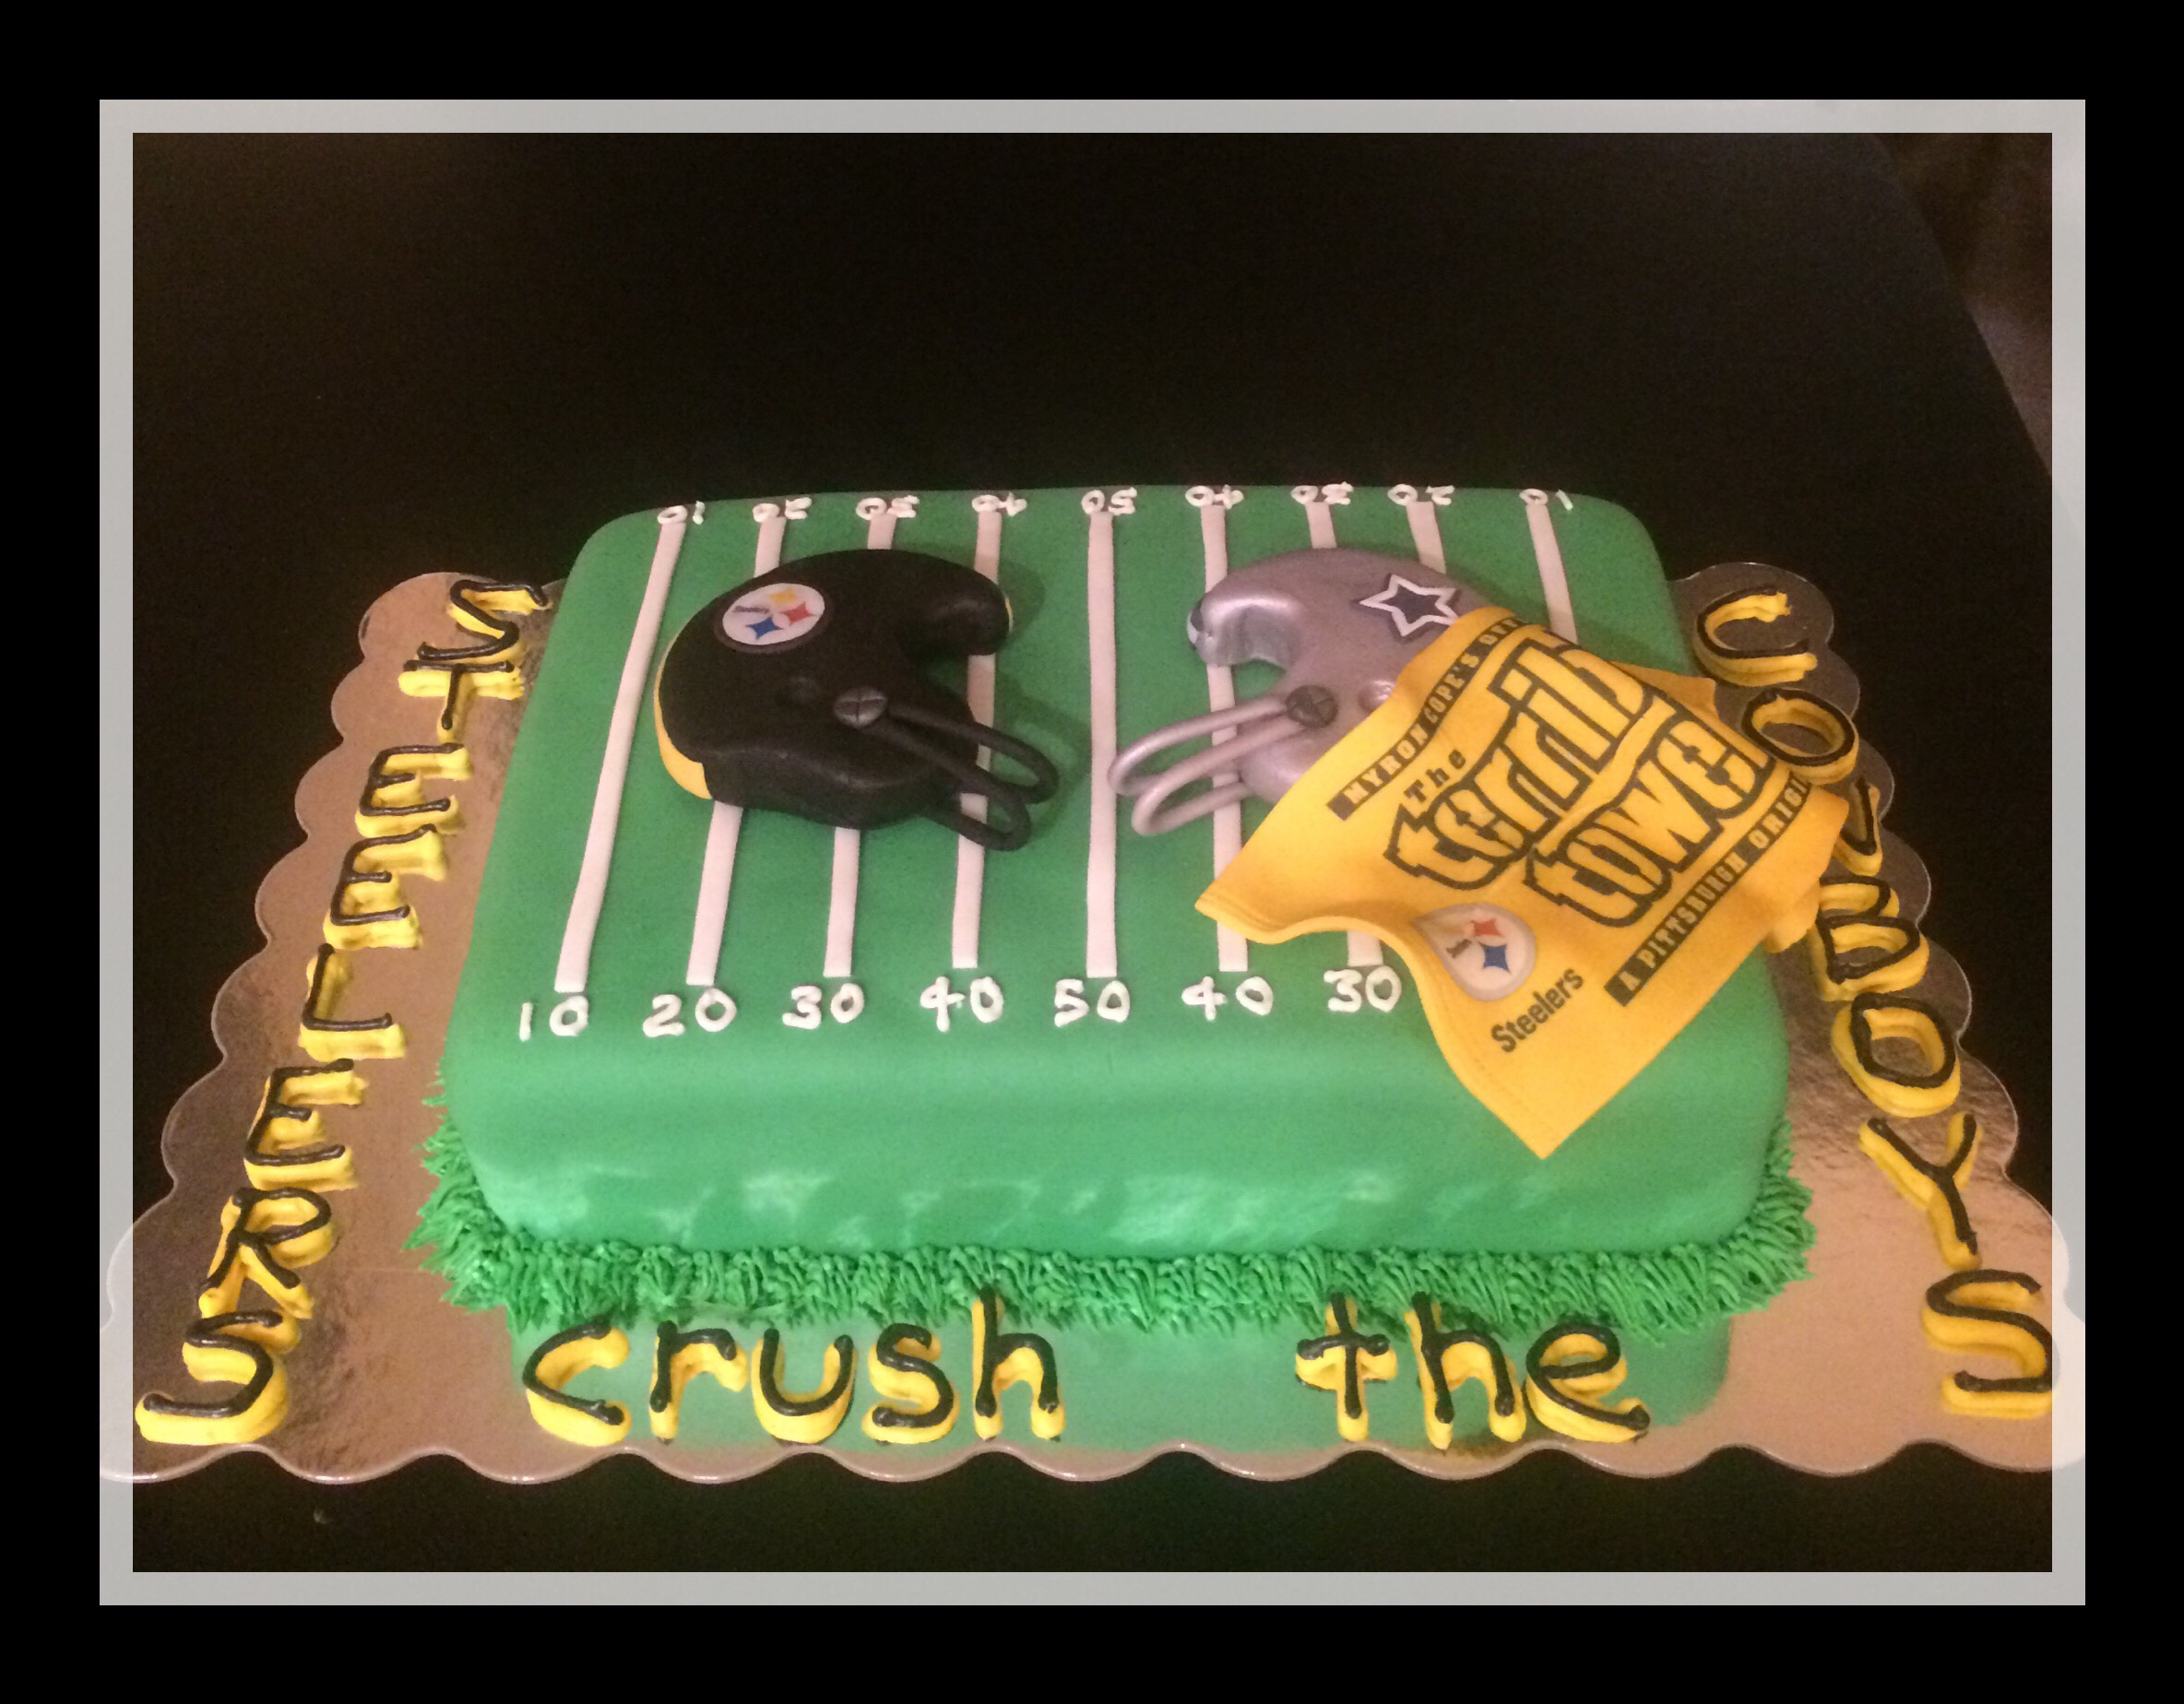 This great birthday cake I was suprised with today : r/steelers